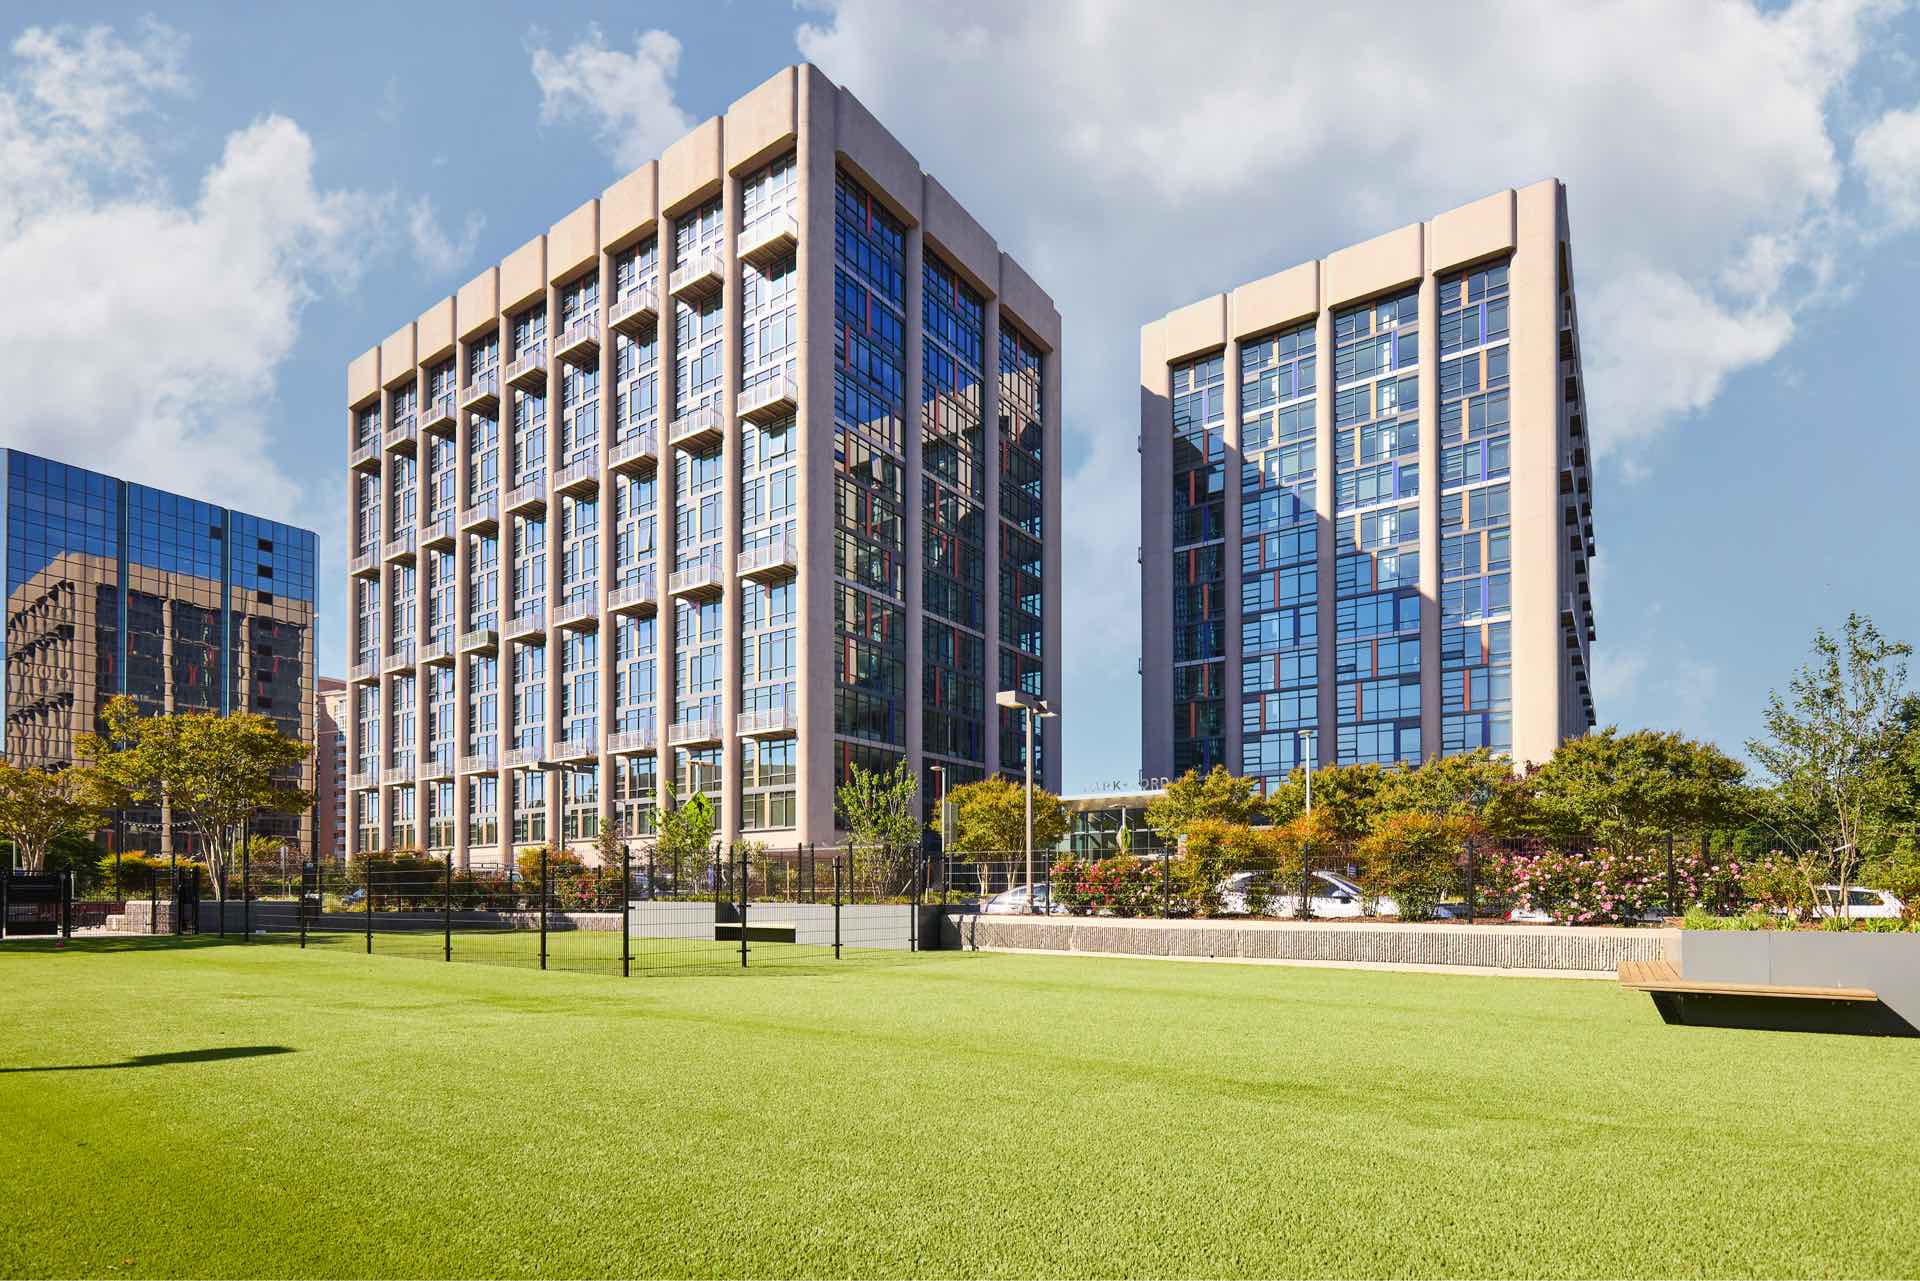 Lowe and USAA Unveil Transformation of Former Office Complex into 435-Unit Modern Apartment Building in Alexandria, Virginia